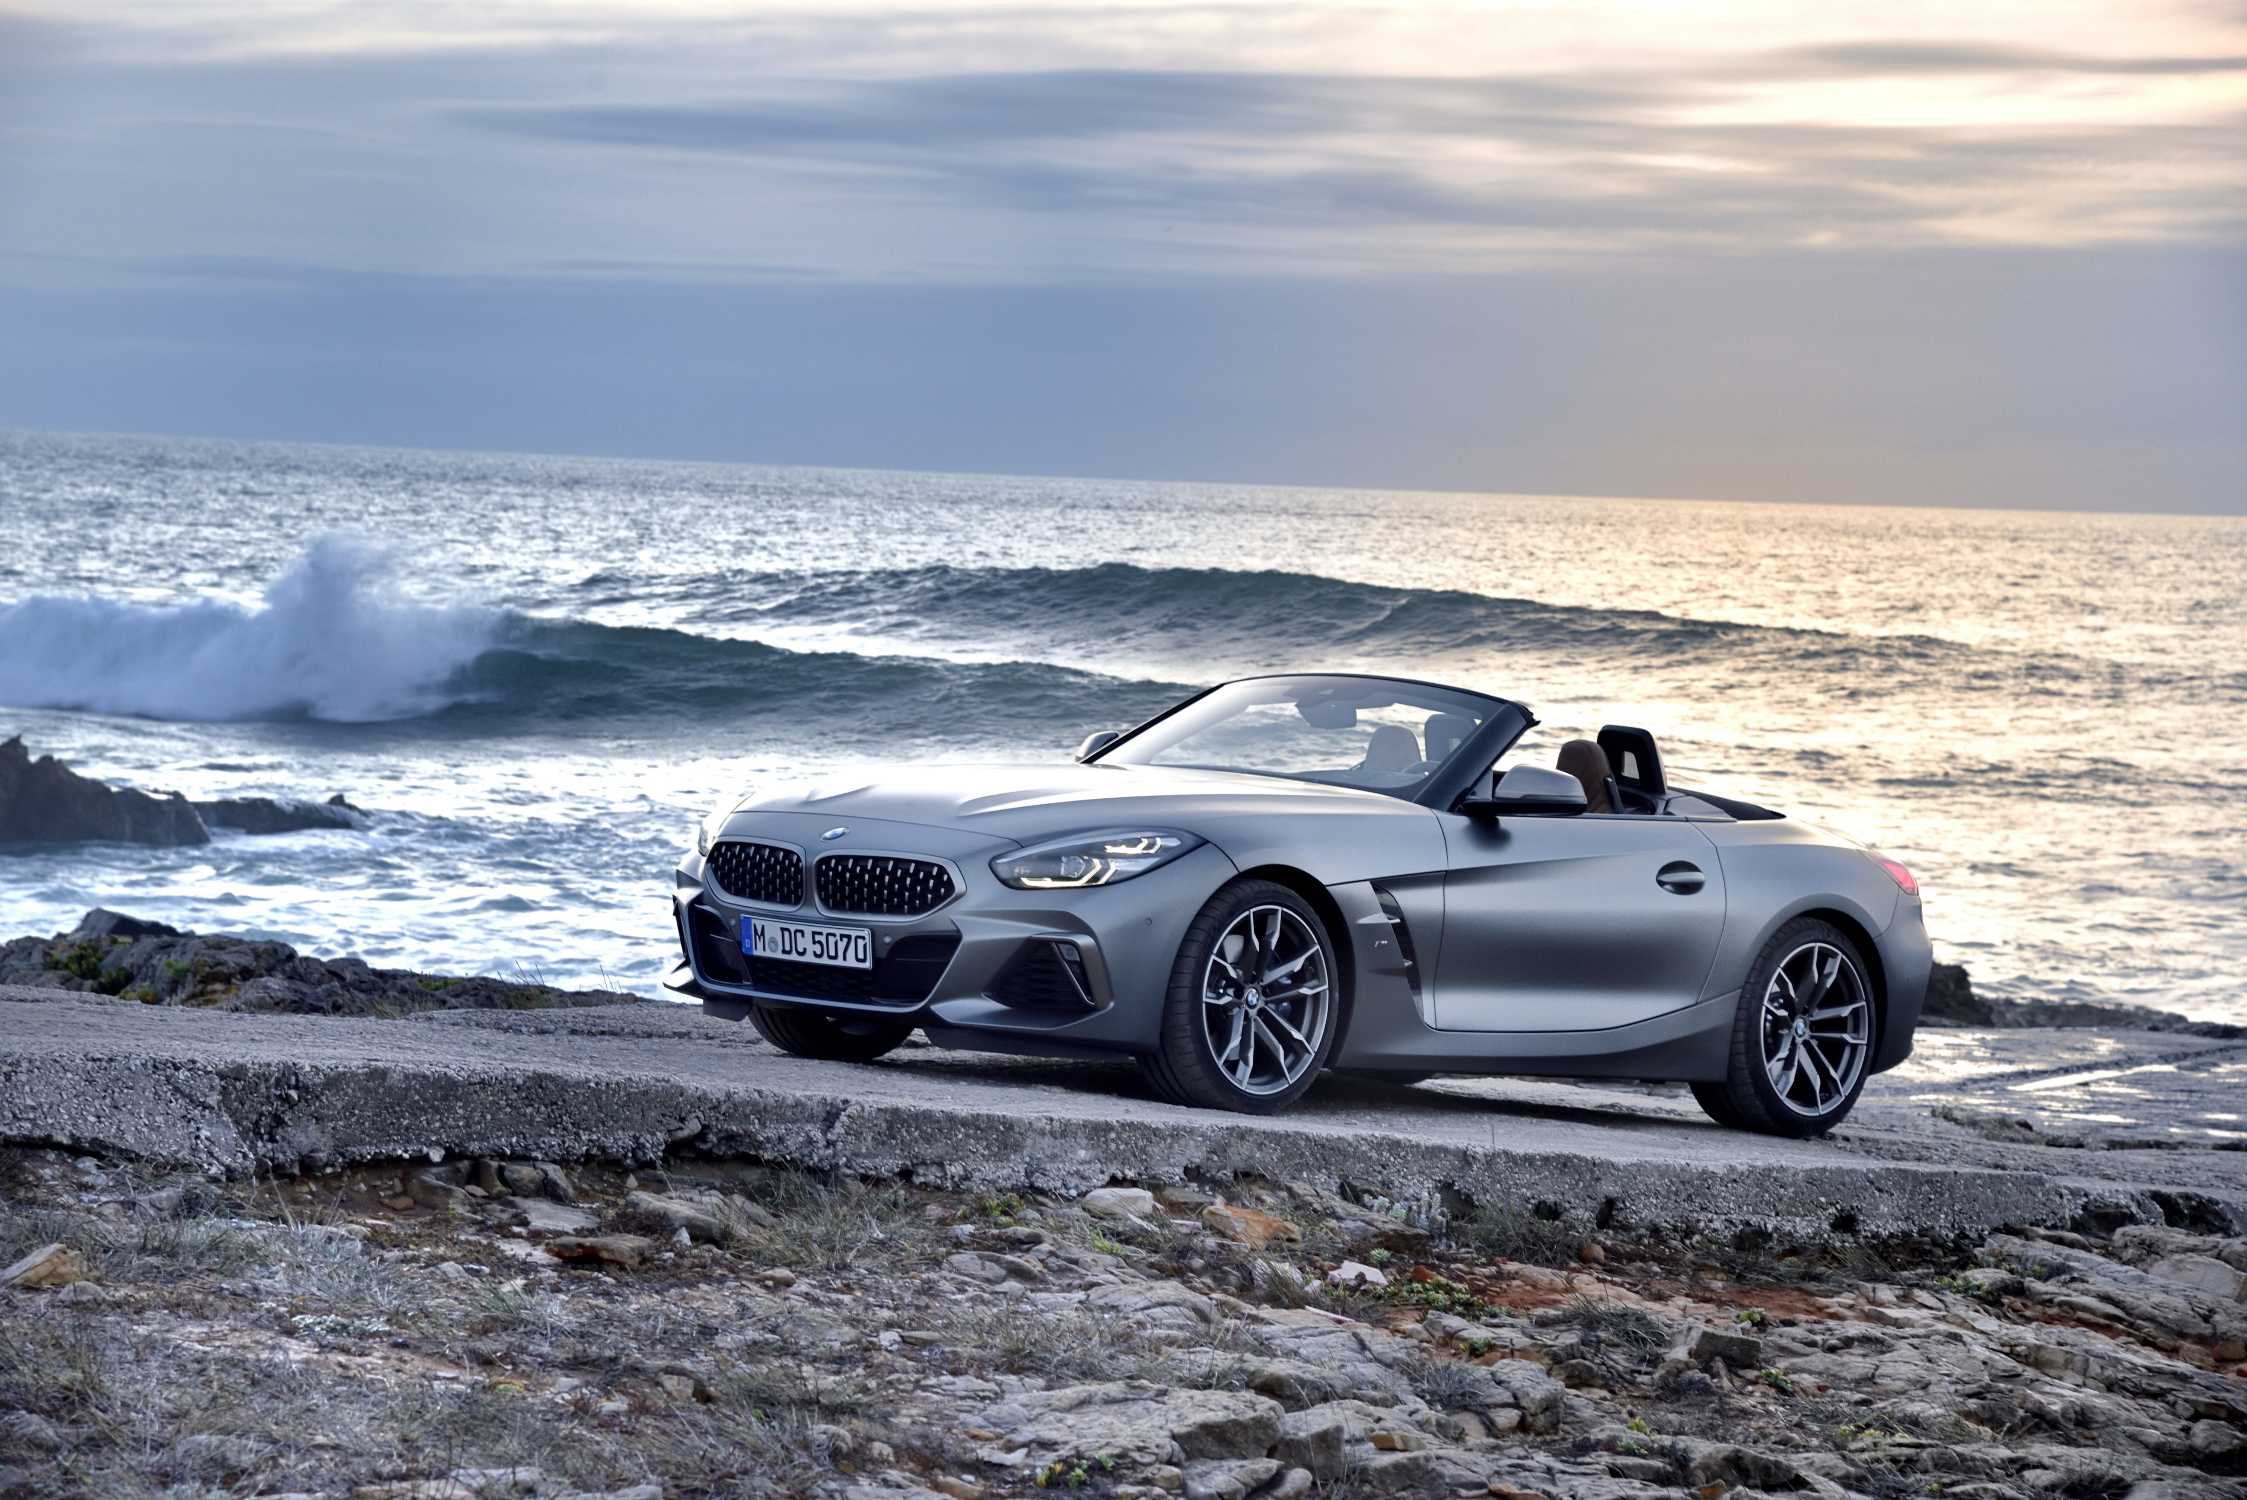 The new BMW Z4 M40i Roadster in color Frozen Grey II metallic and 19" M light alloy wheels Double-spoke style 800 M Bicolour - Lissabon / Sintra (11/ 2018).